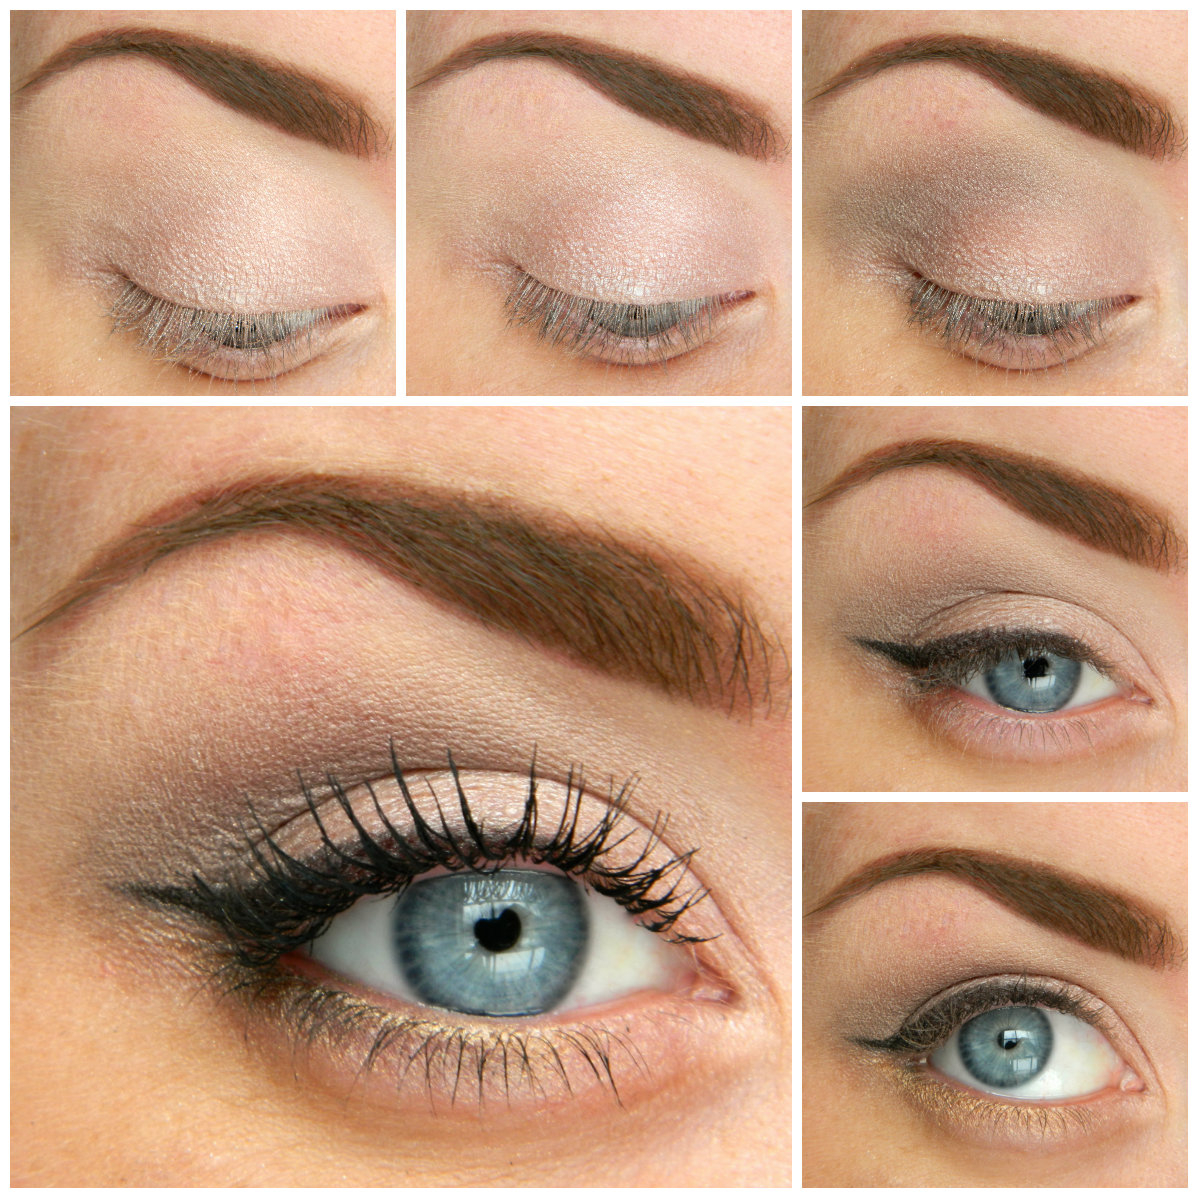 Formal Makeup Ideas For Blue Eyes 5 Ways To Make Blue Eyes Pop With Proper Eye Makeup Her Style Code